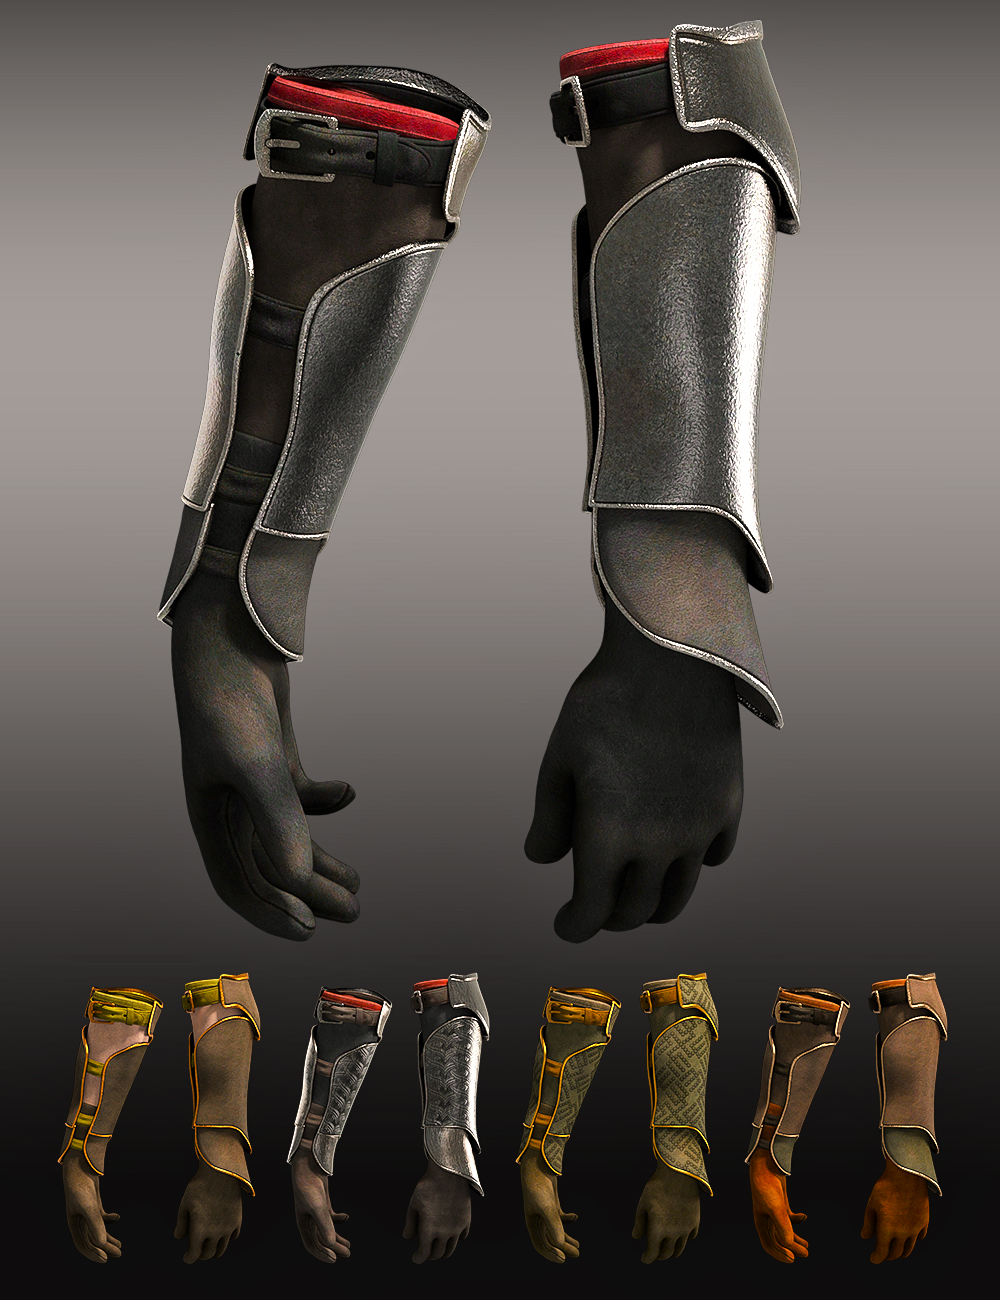 Iron Scale Armor Outfit Gloves and Bracers for Genesis 8 and 8.1 Males